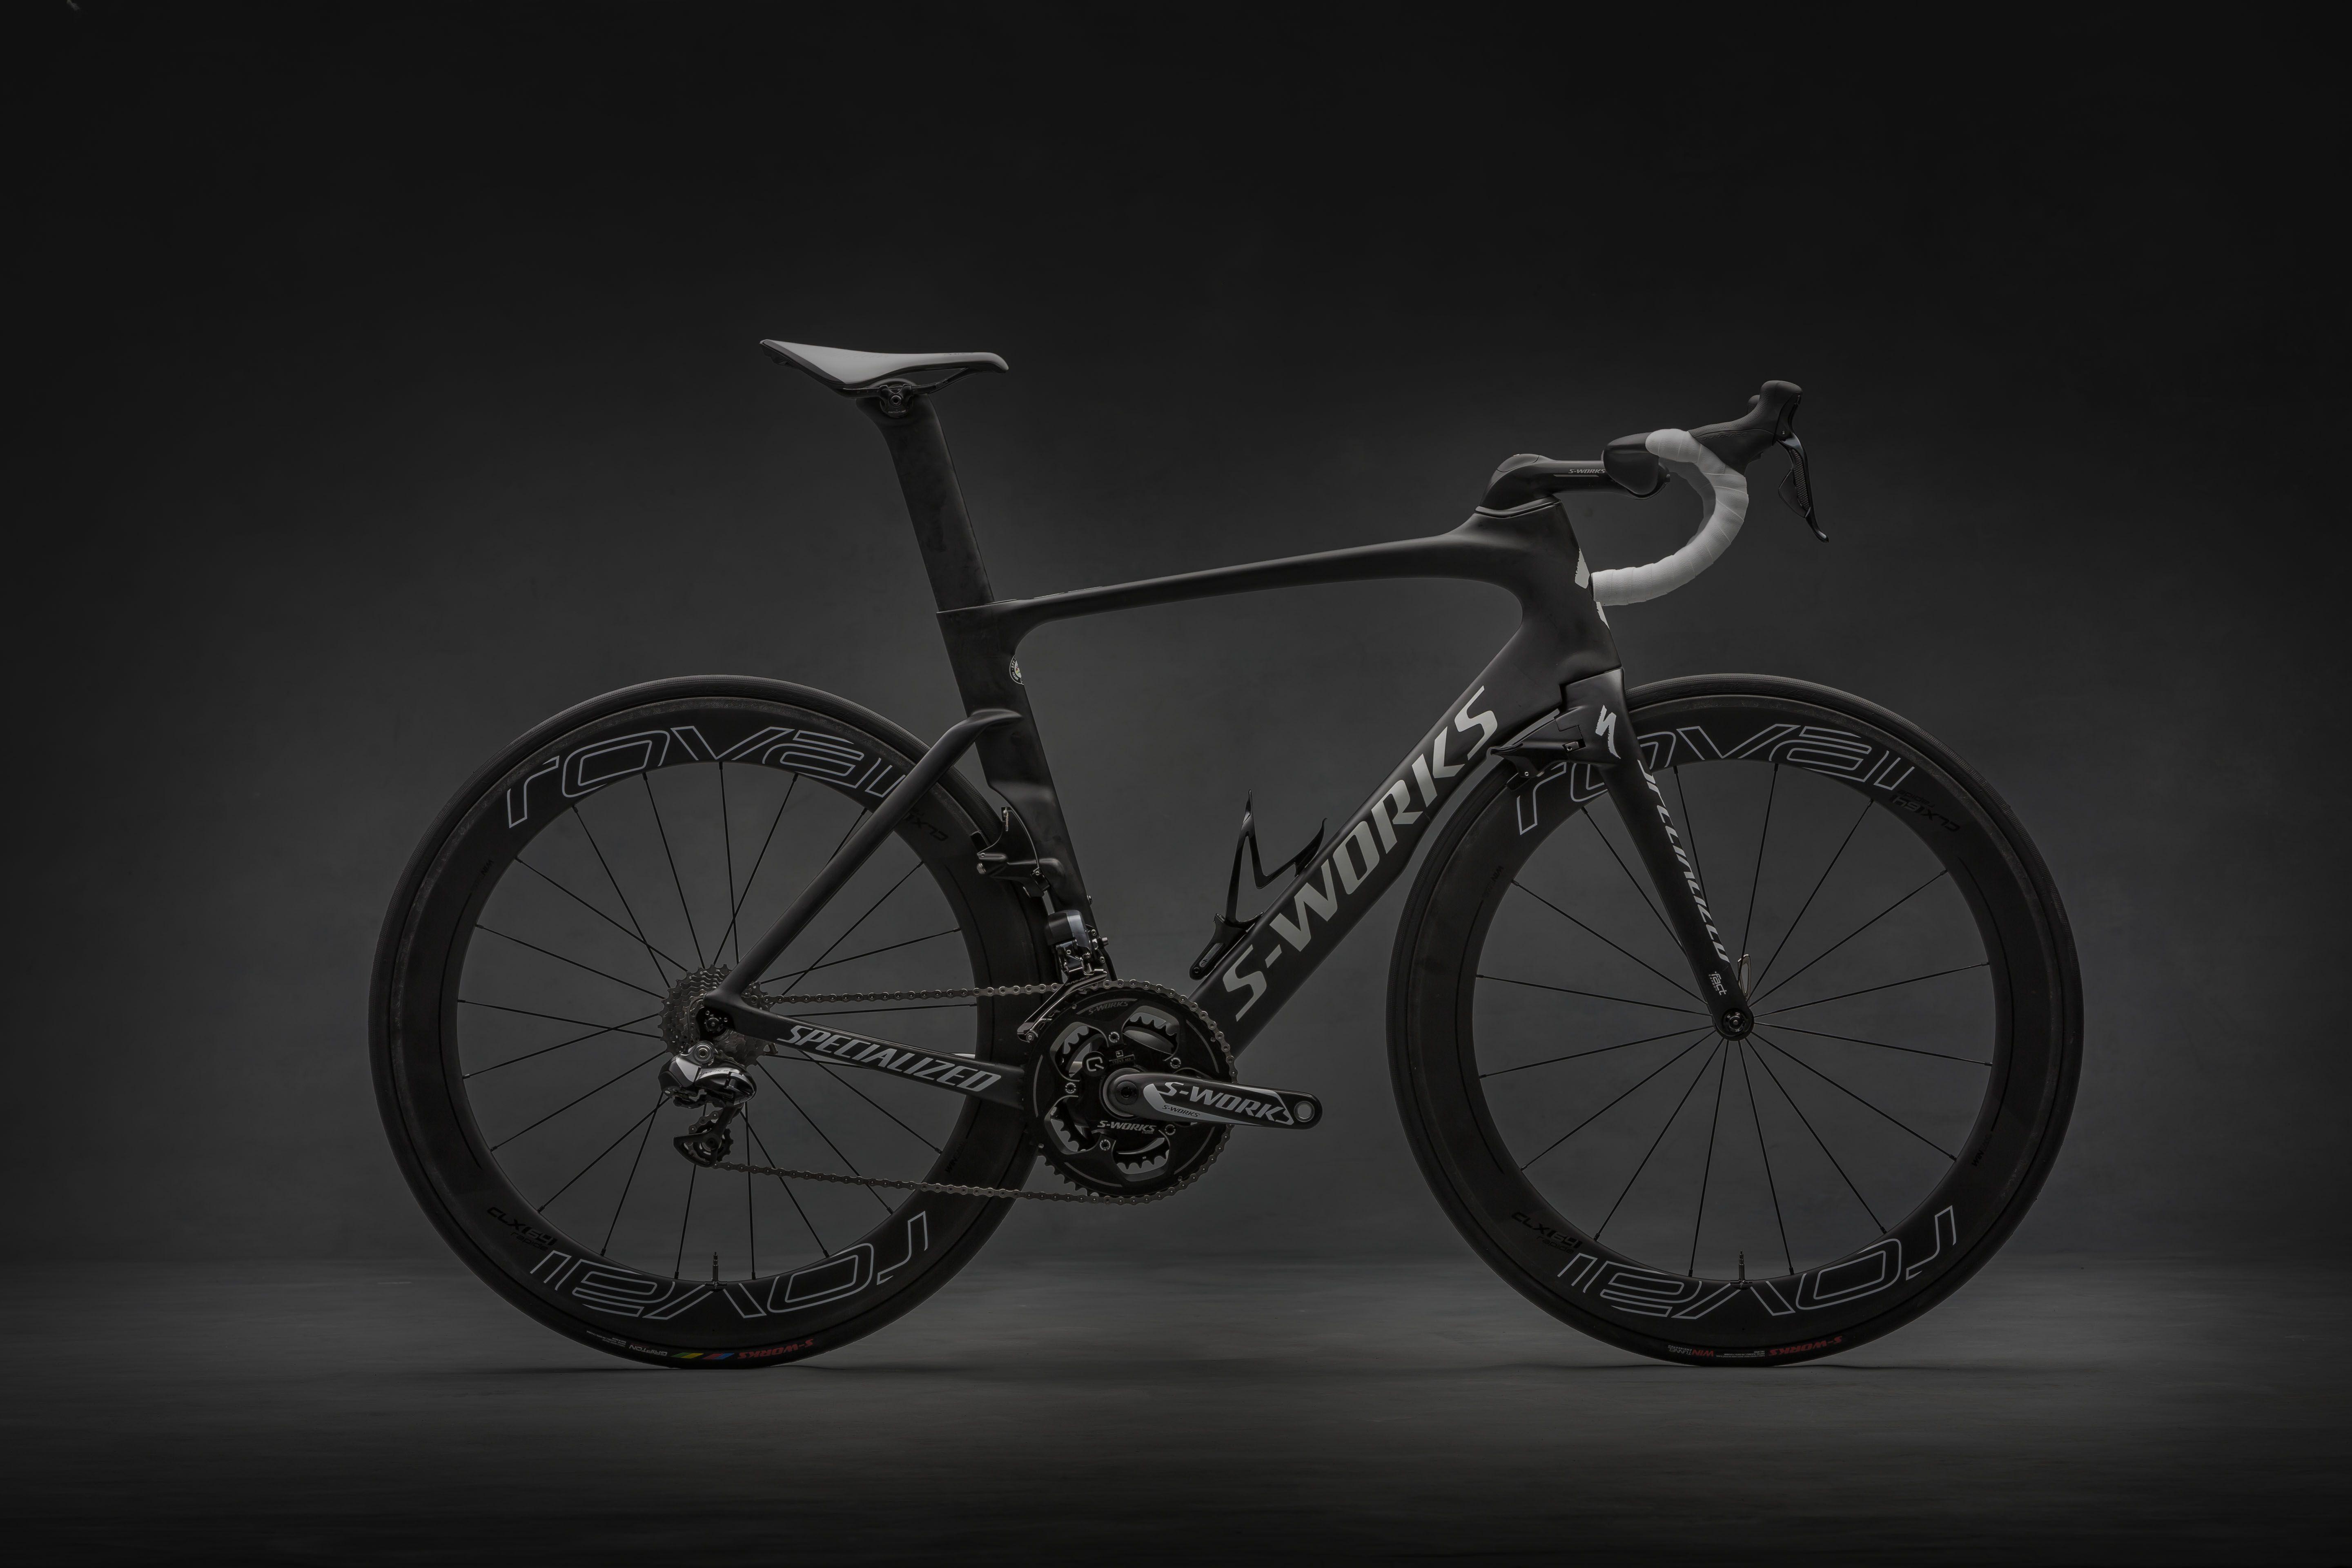 Specialized updates Venge road bike, offers aero road package